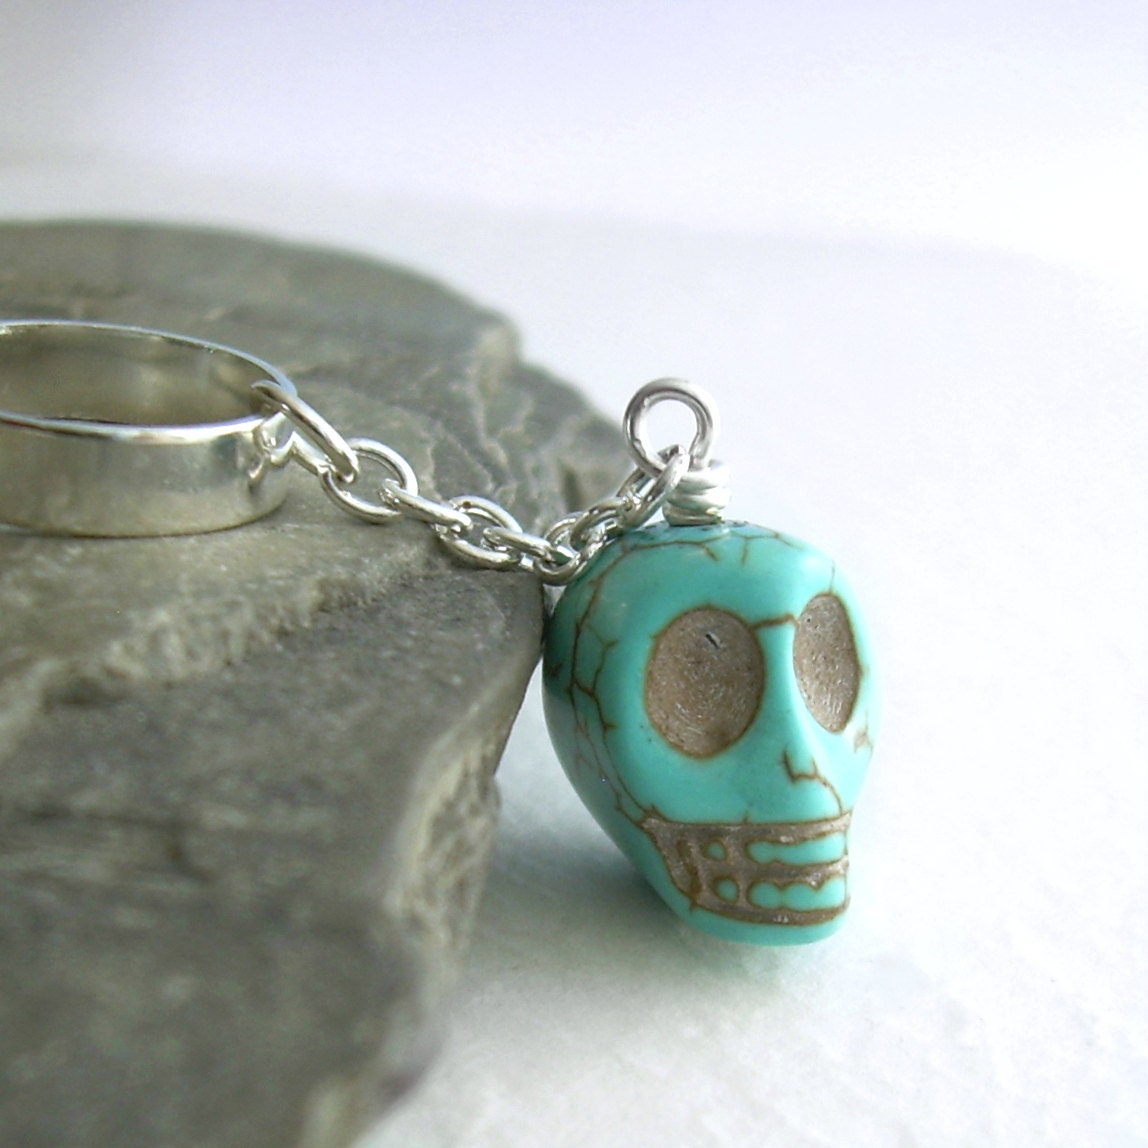 Cartilage Earrings on Turquoise Skull Cartilage Earring  Stone Ear Cuff Jewelry On Chain